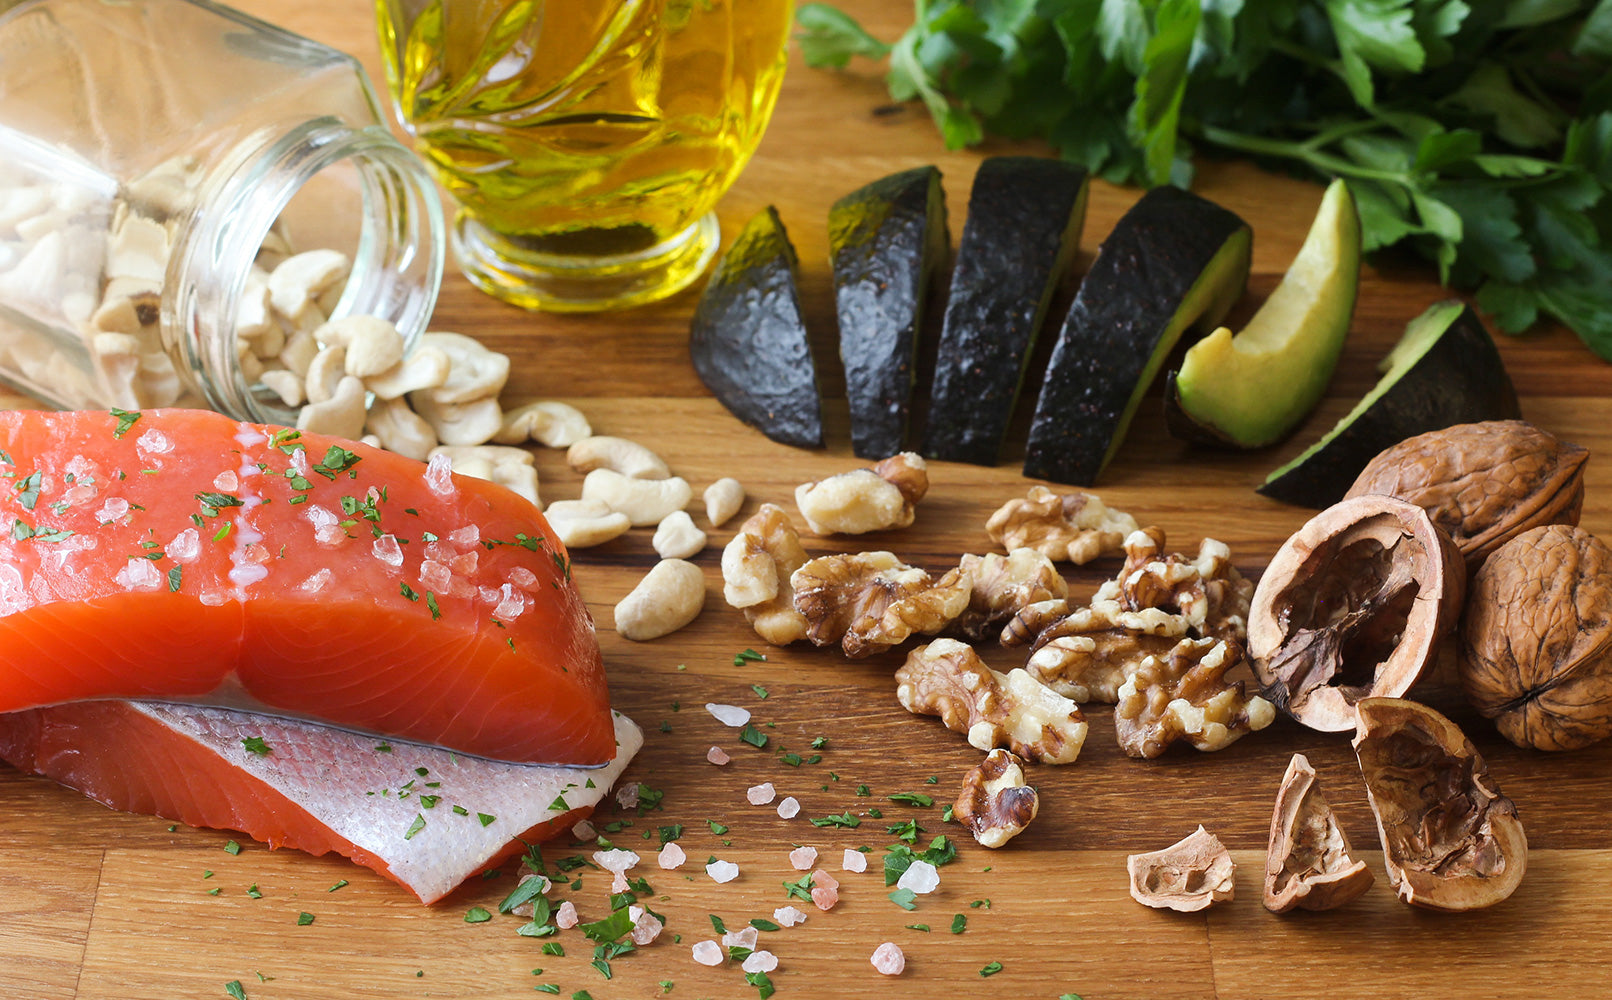 Salmon, walnuts, avocado and other brain healthy foods on cutting board